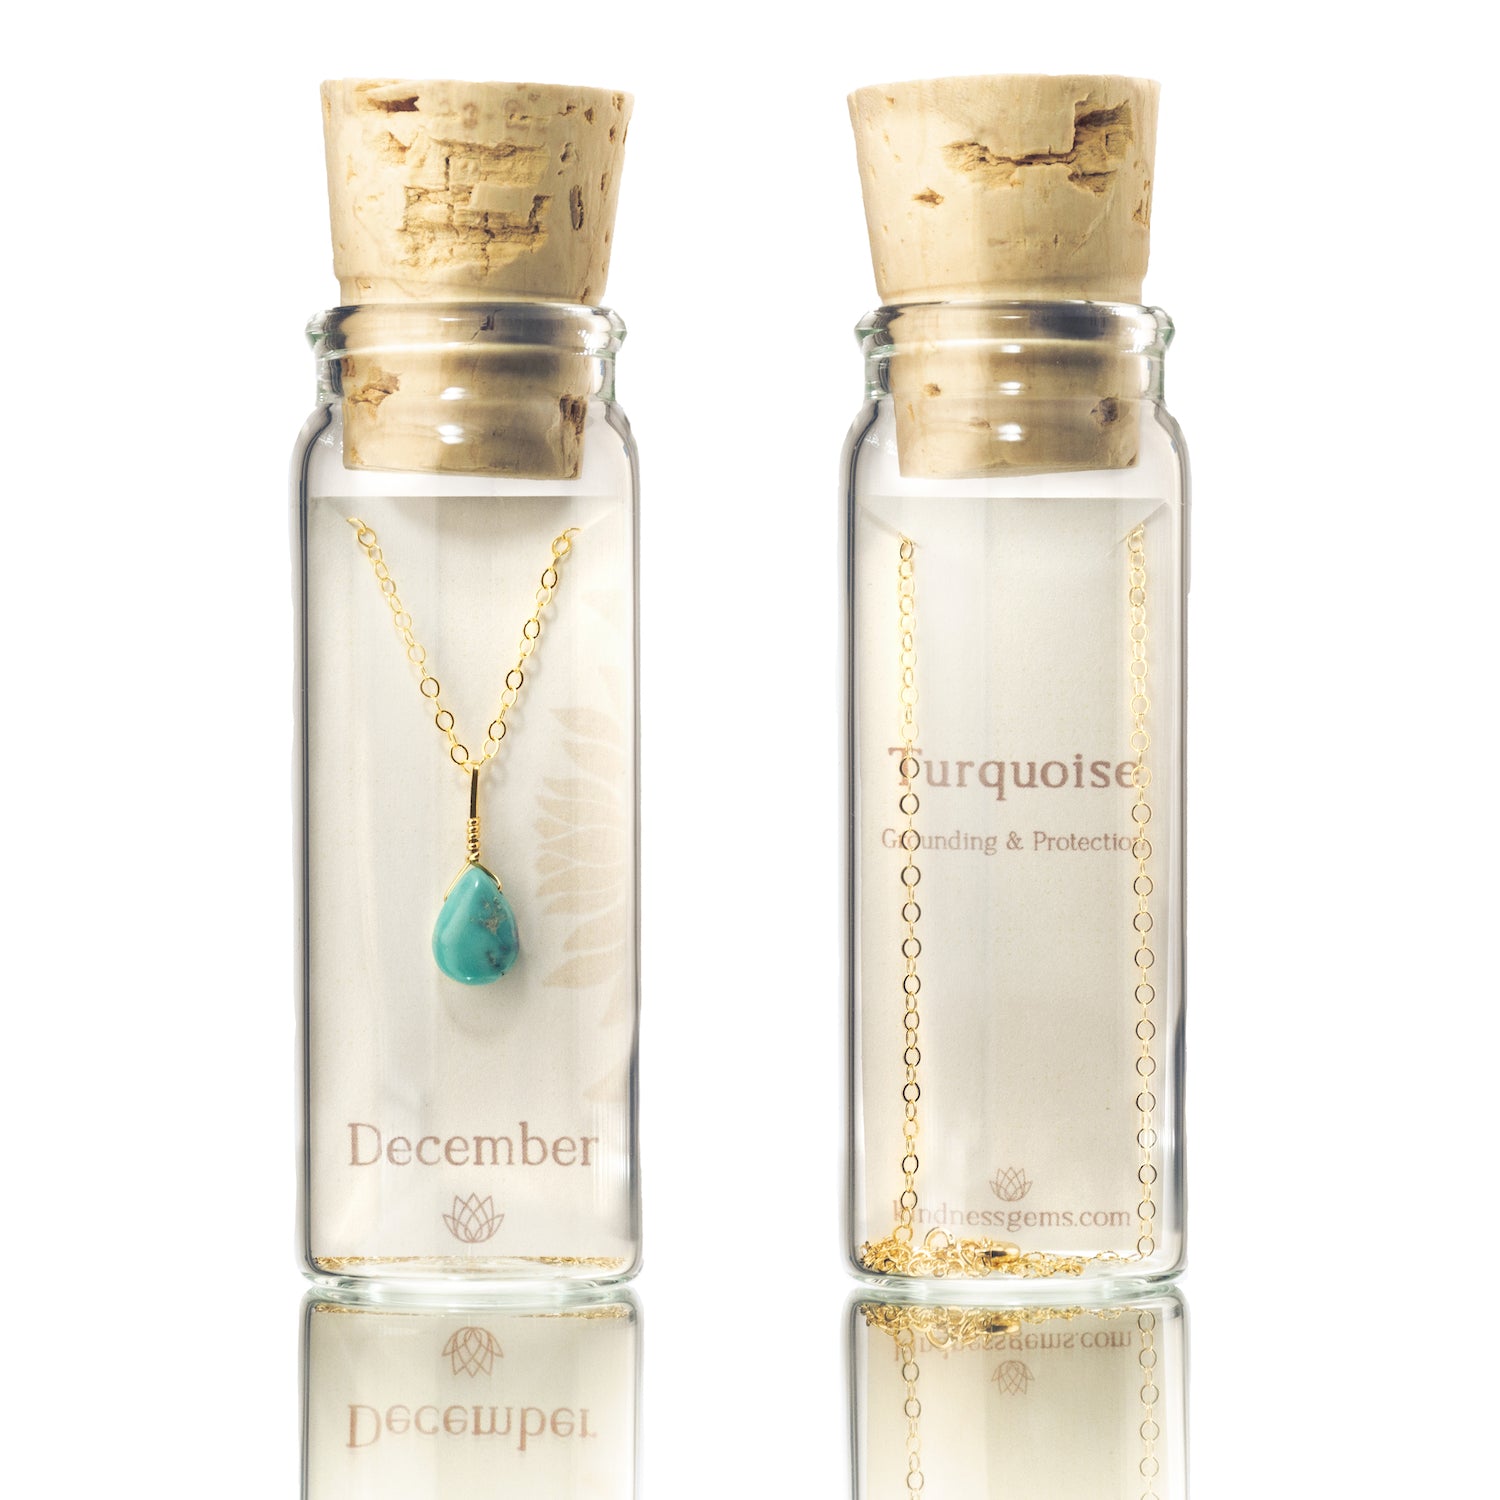 jewellery gift turquoise december birthstone necklace in a bottle